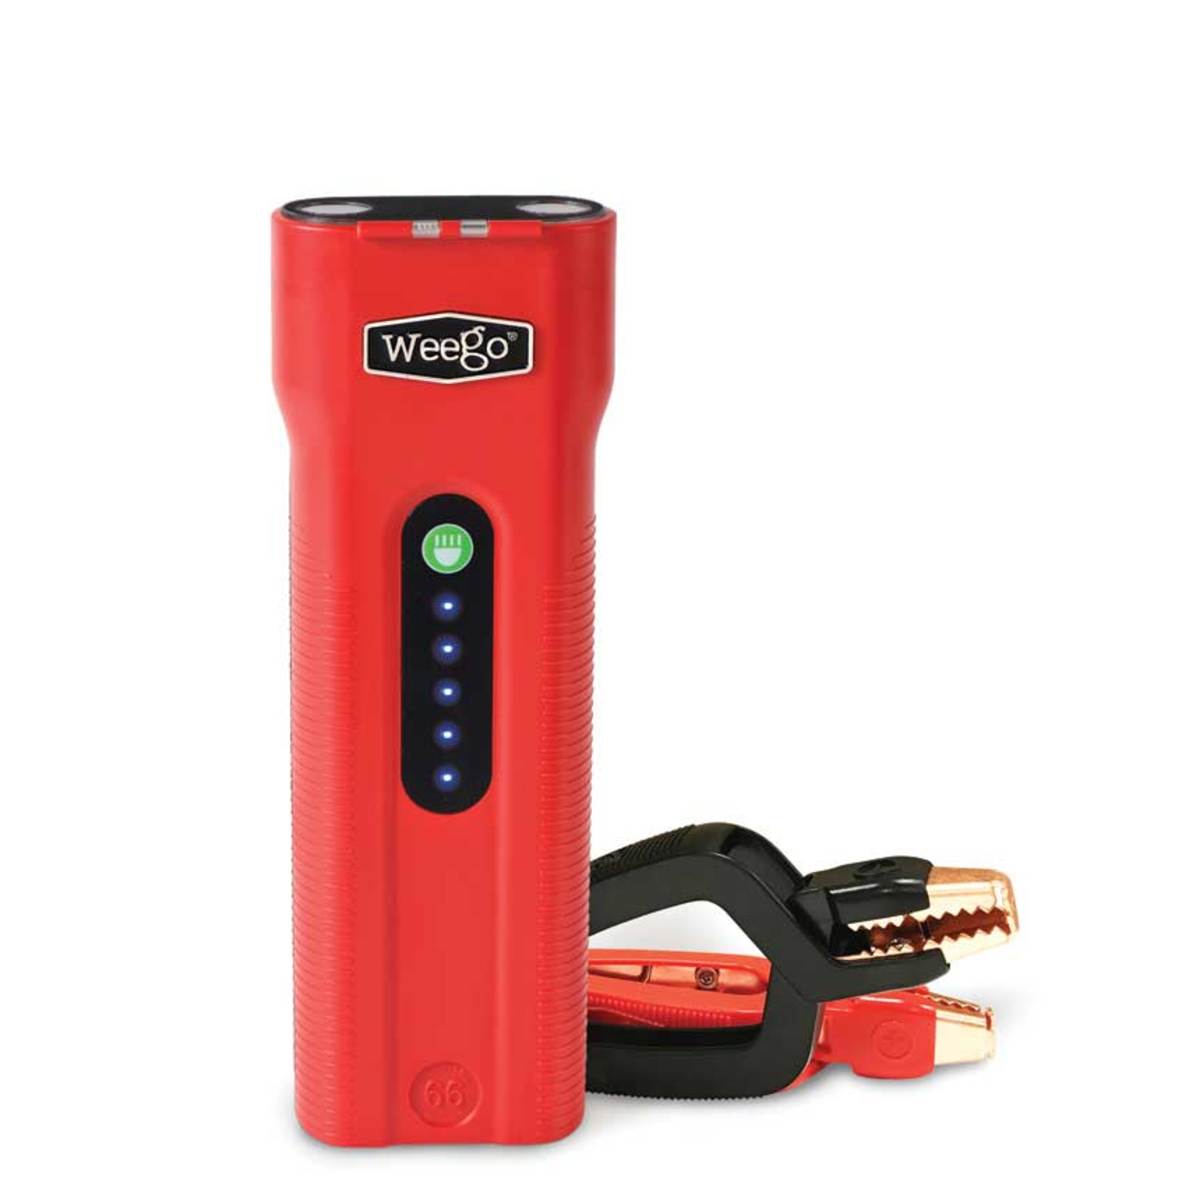 Weego's Portable Power compact jump starter battery